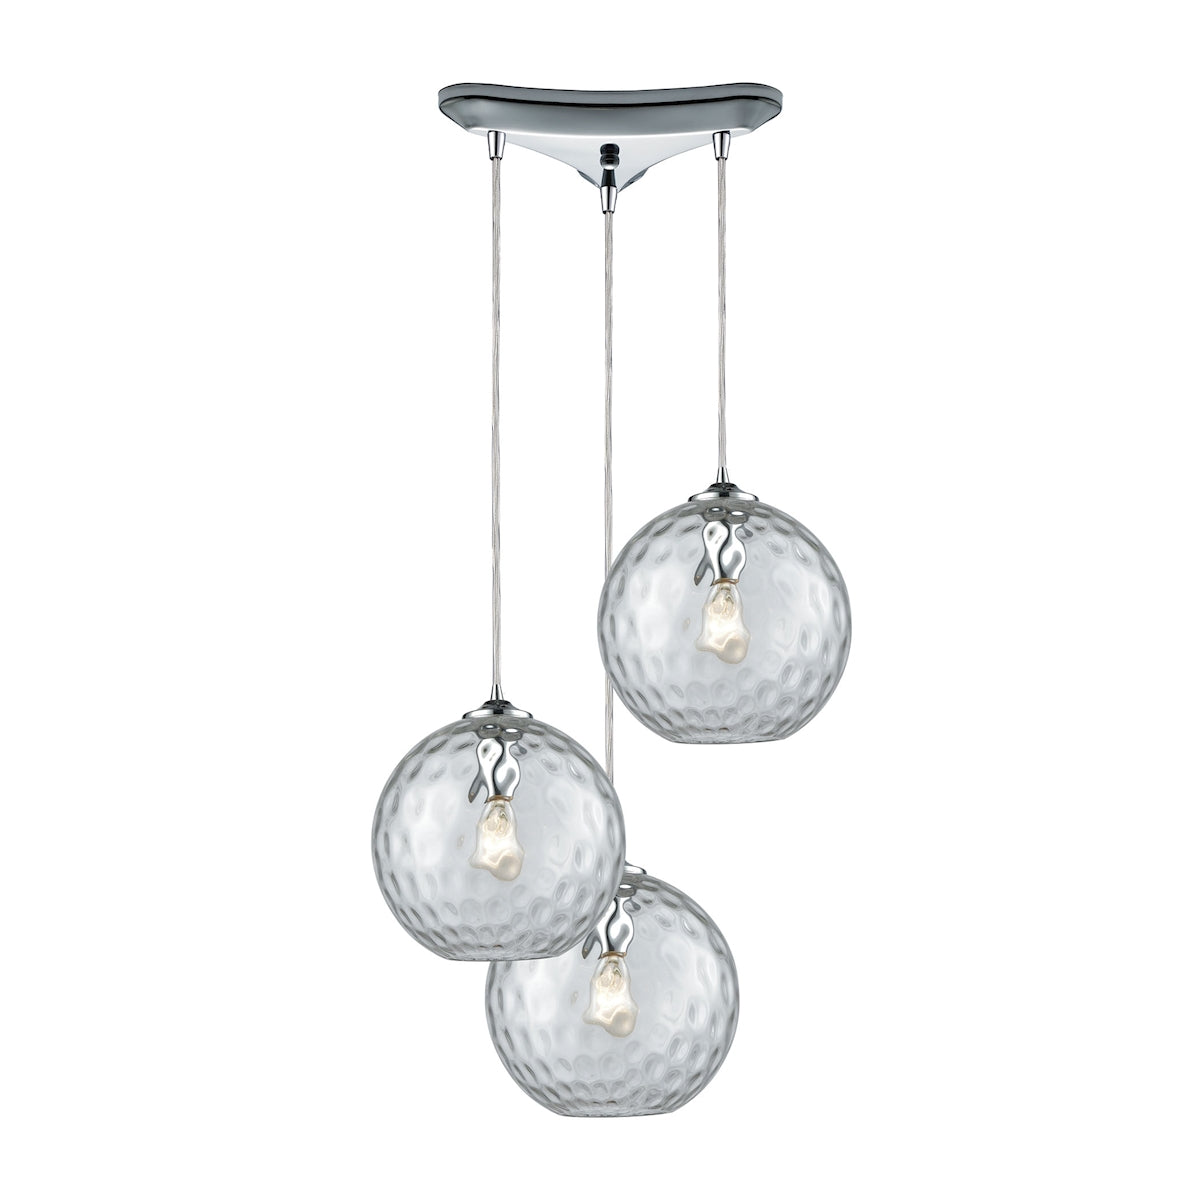 ELK Lighting 31380/3CLR Watersphere 3-Light Triangular Pendant Fixture in Chrome with Hammered Clear Glass